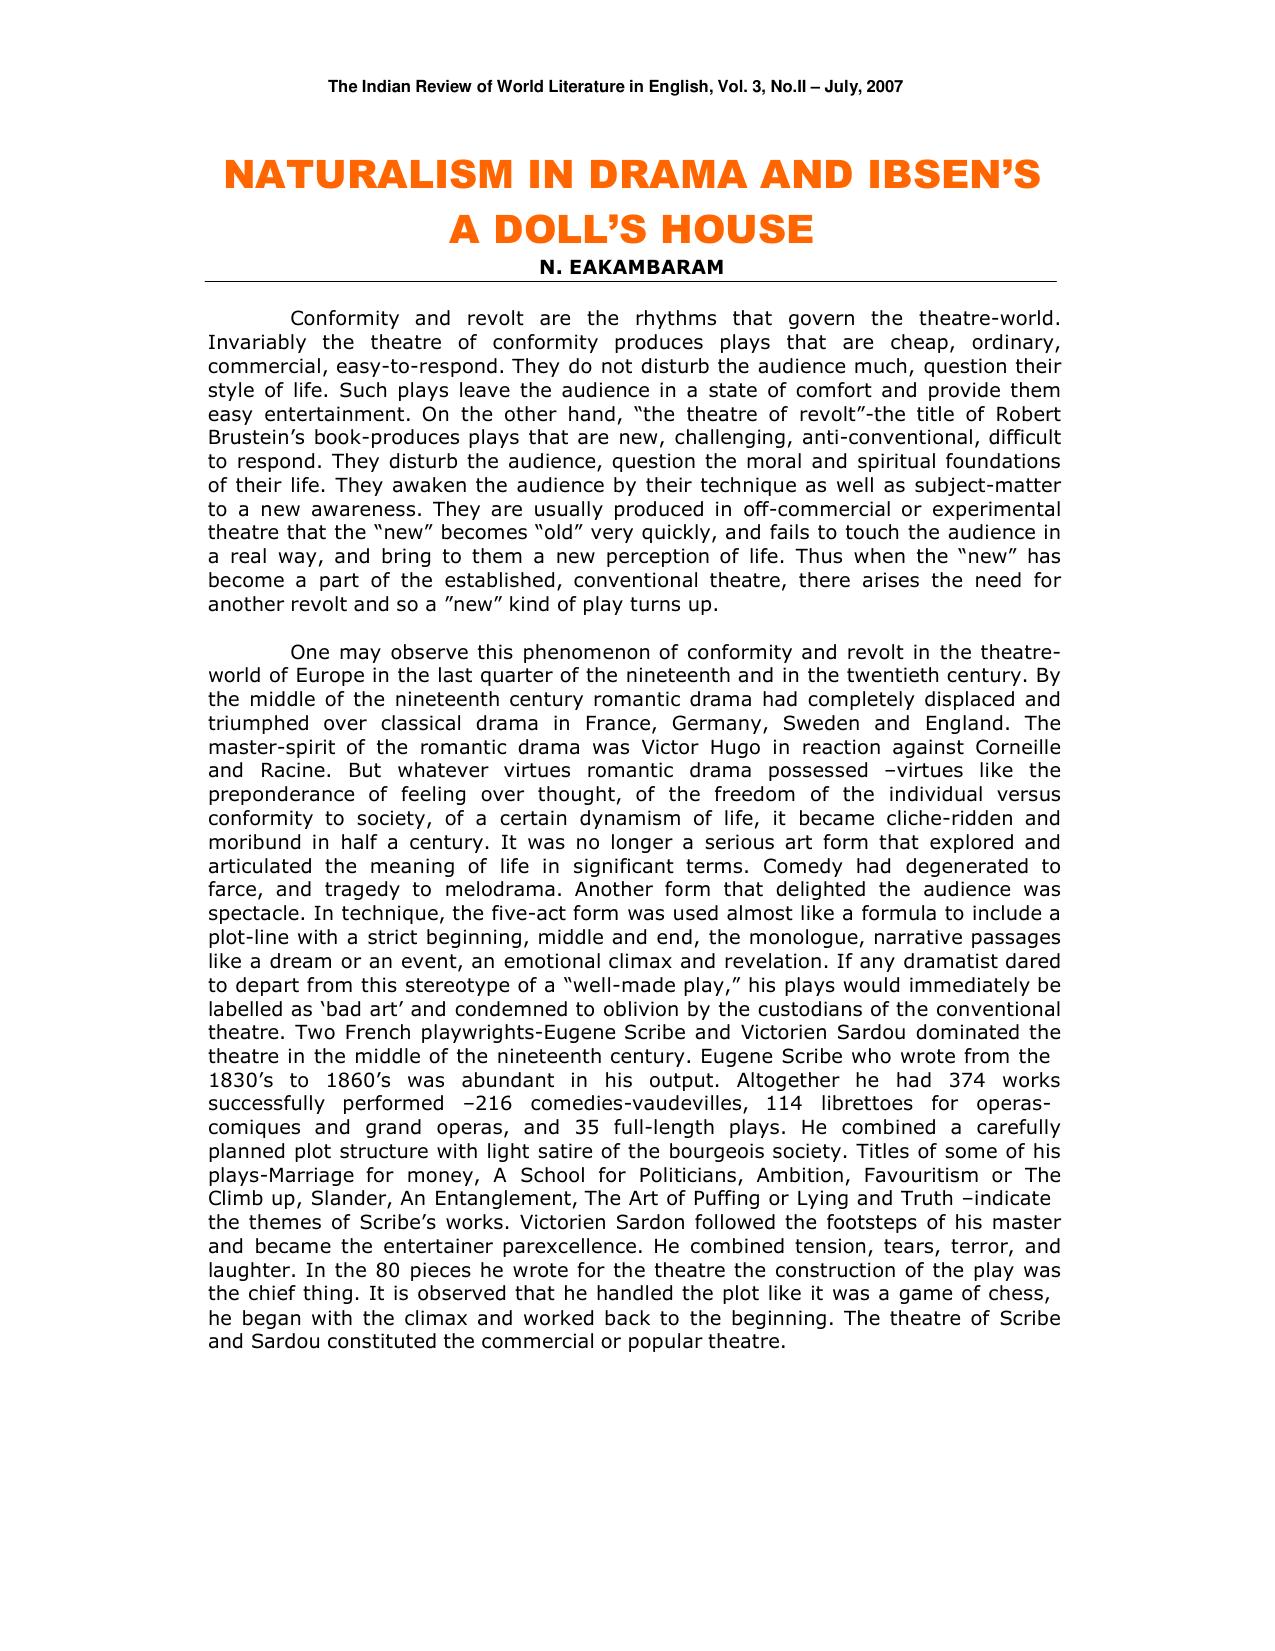 Microsoft Word - naturalism in drama and ibsens a dolls house.doc